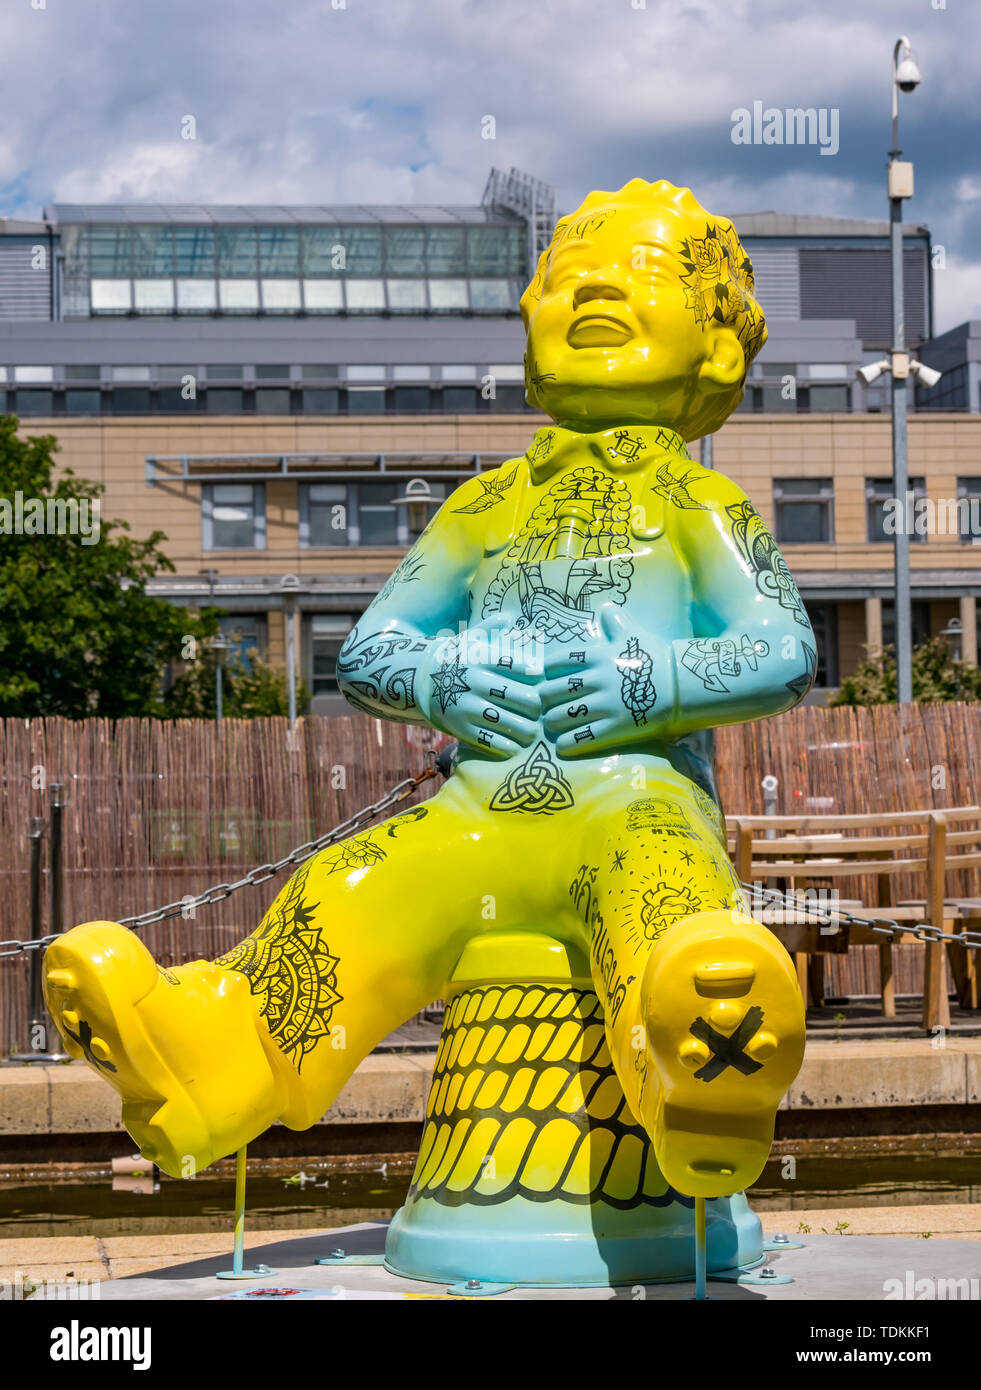 Leith, Edinburgh, Scotland, United Kingdom, 17 June 2019. Oor Wullie's Big Bucket Trail: An art trail of 200 Oor Wullie sculptures appear in Scottish cities in a mass arts event that lasts until August 30th. Oor Wullie is an iconic Scottish cartoon character from the Sunday Post newspaper. The sculptures will be auctioned to raise money for Scotland’s children’s hospital charities. There are 5 in the Leith area, and 60 in Edinburgh altogether.  Sailoor Wullie by The Leith Agency Stock Photo